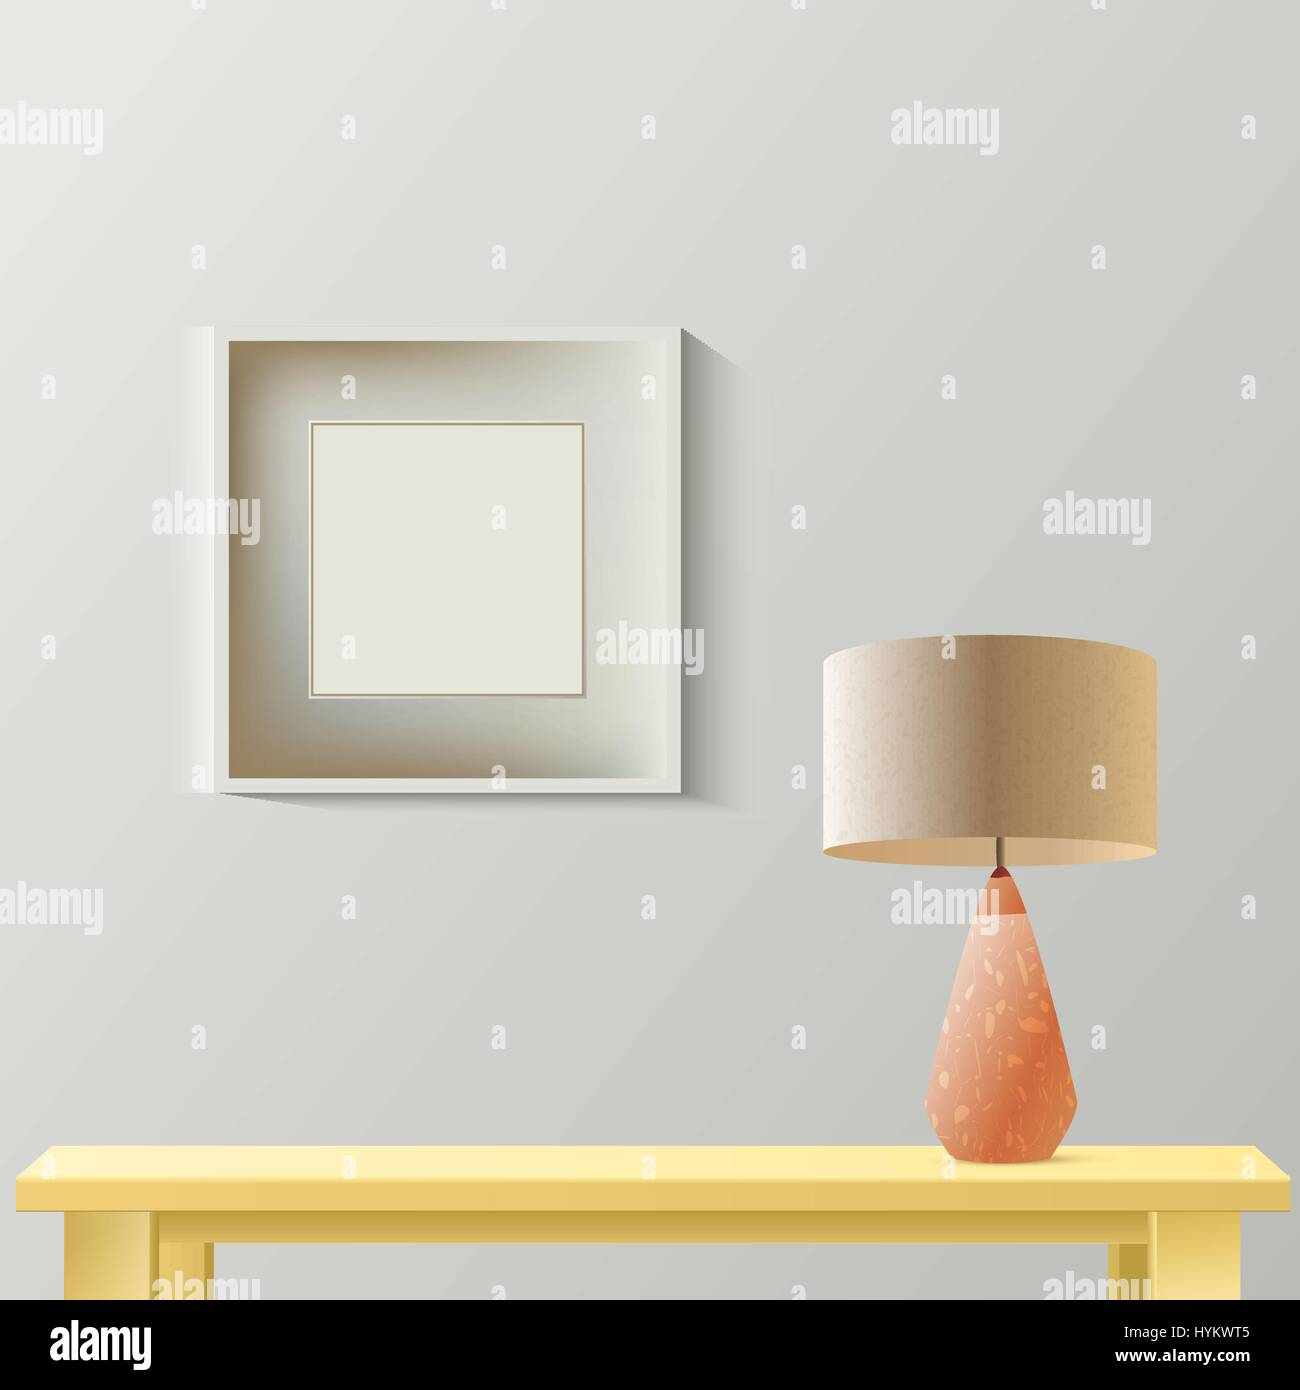 Interior room realistic mockup with frame or picture on wall,wooden table and lamp. Layered, editable. Fashion trendy colors Stock Vector